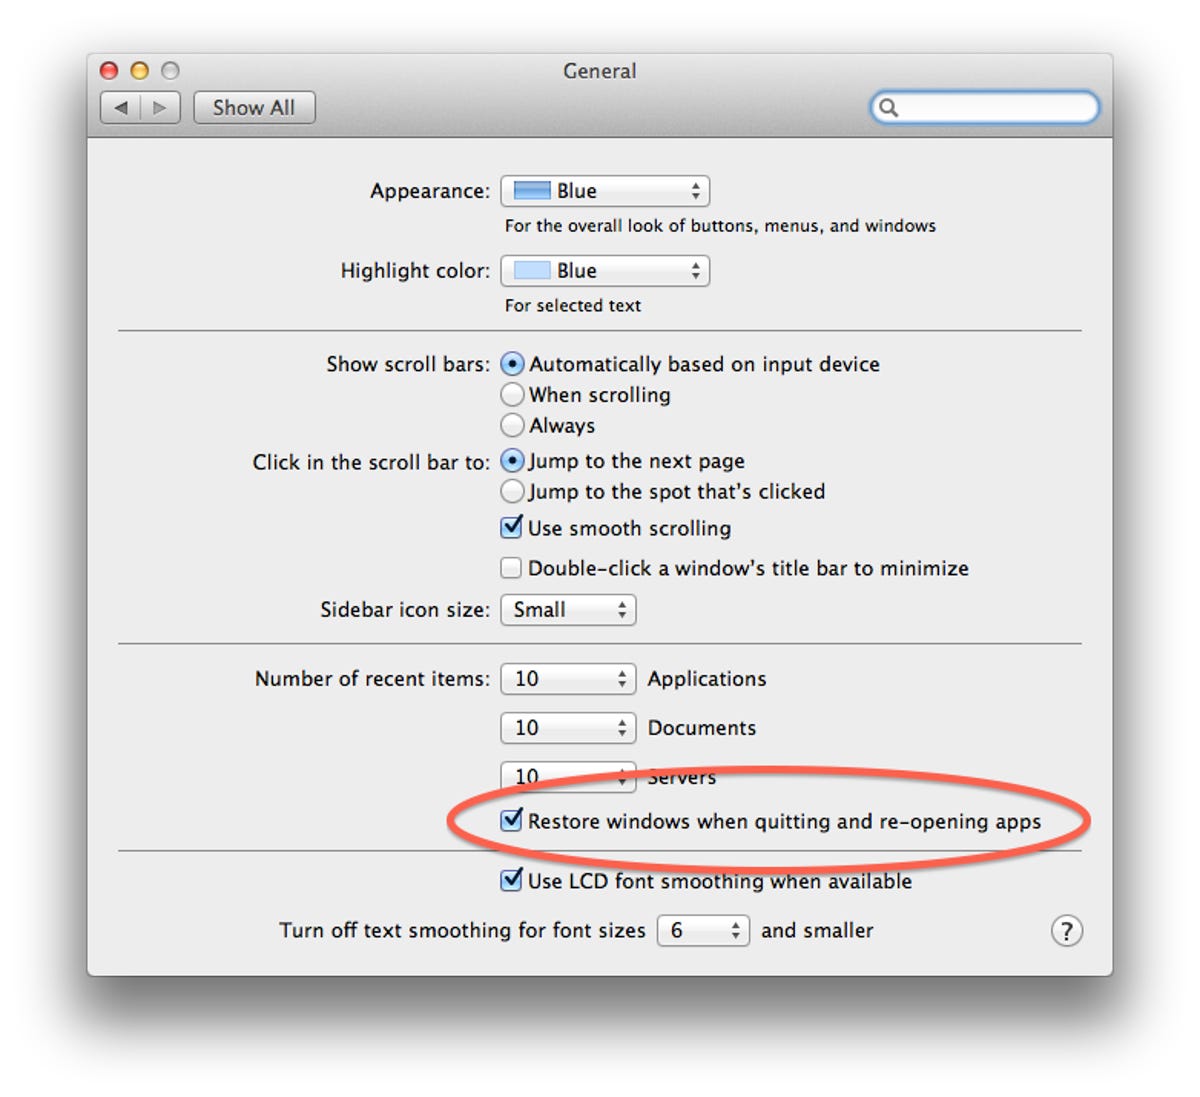 Resume settings in the system preferences